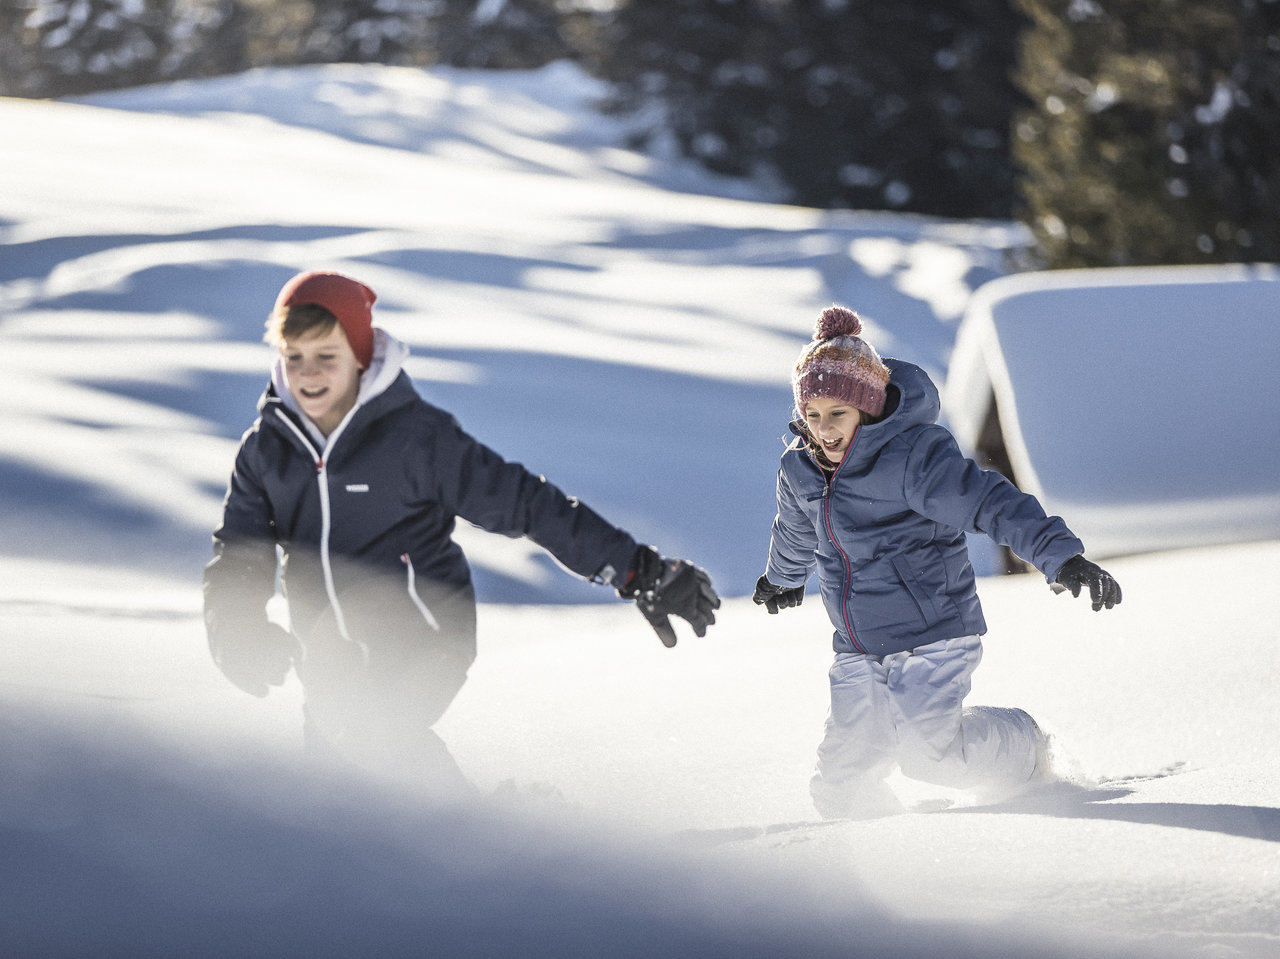 Snow fun for families with children in the quiet Ultental Valley.